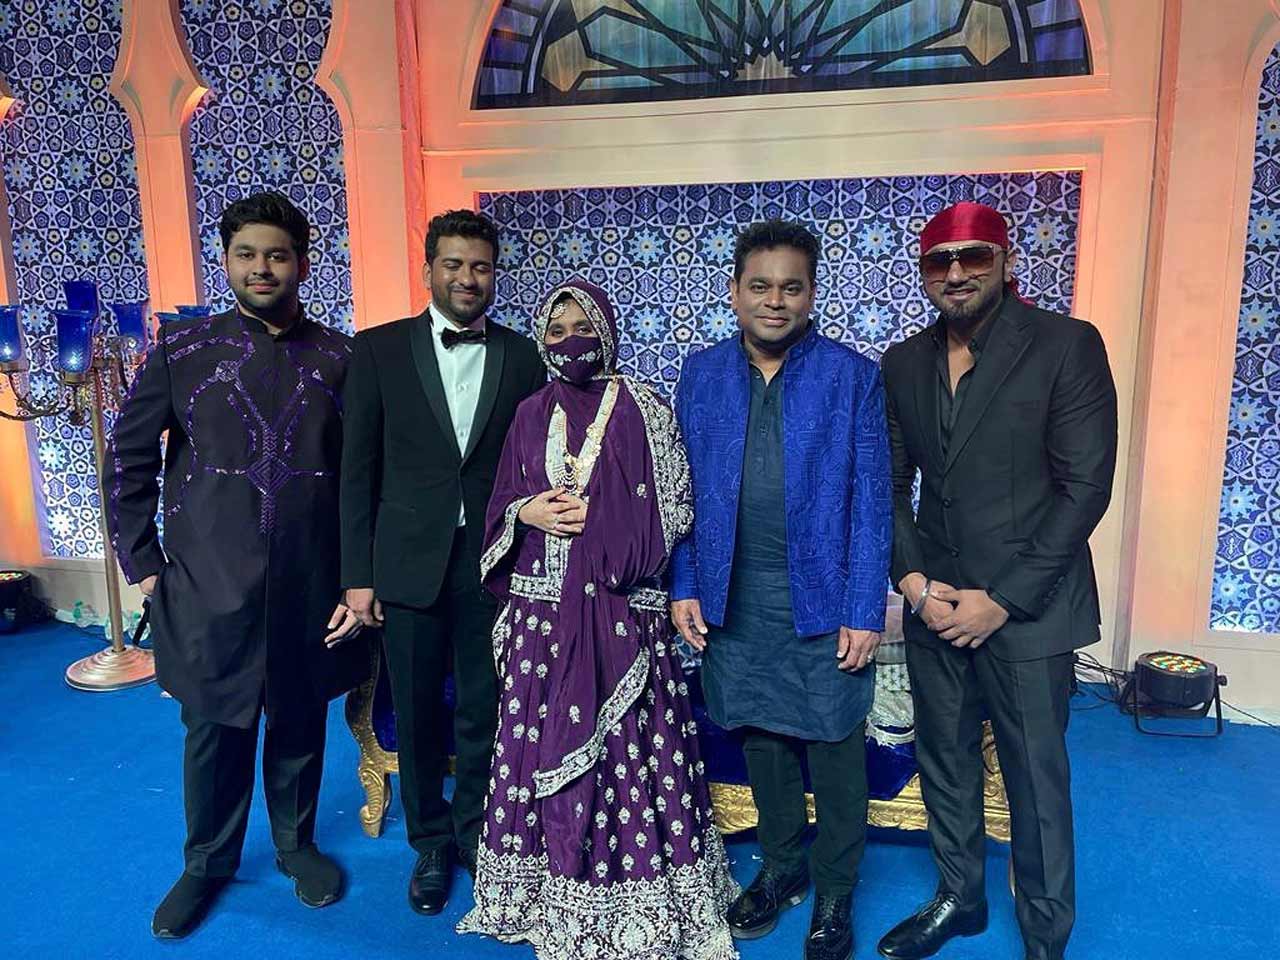 Honey Singh and Sonu Nigam from the music industry attended the wedding reception and blessed the couple. Honey Singh also took to his Instagram to share a picture from the reception as he wrote in the caption, 